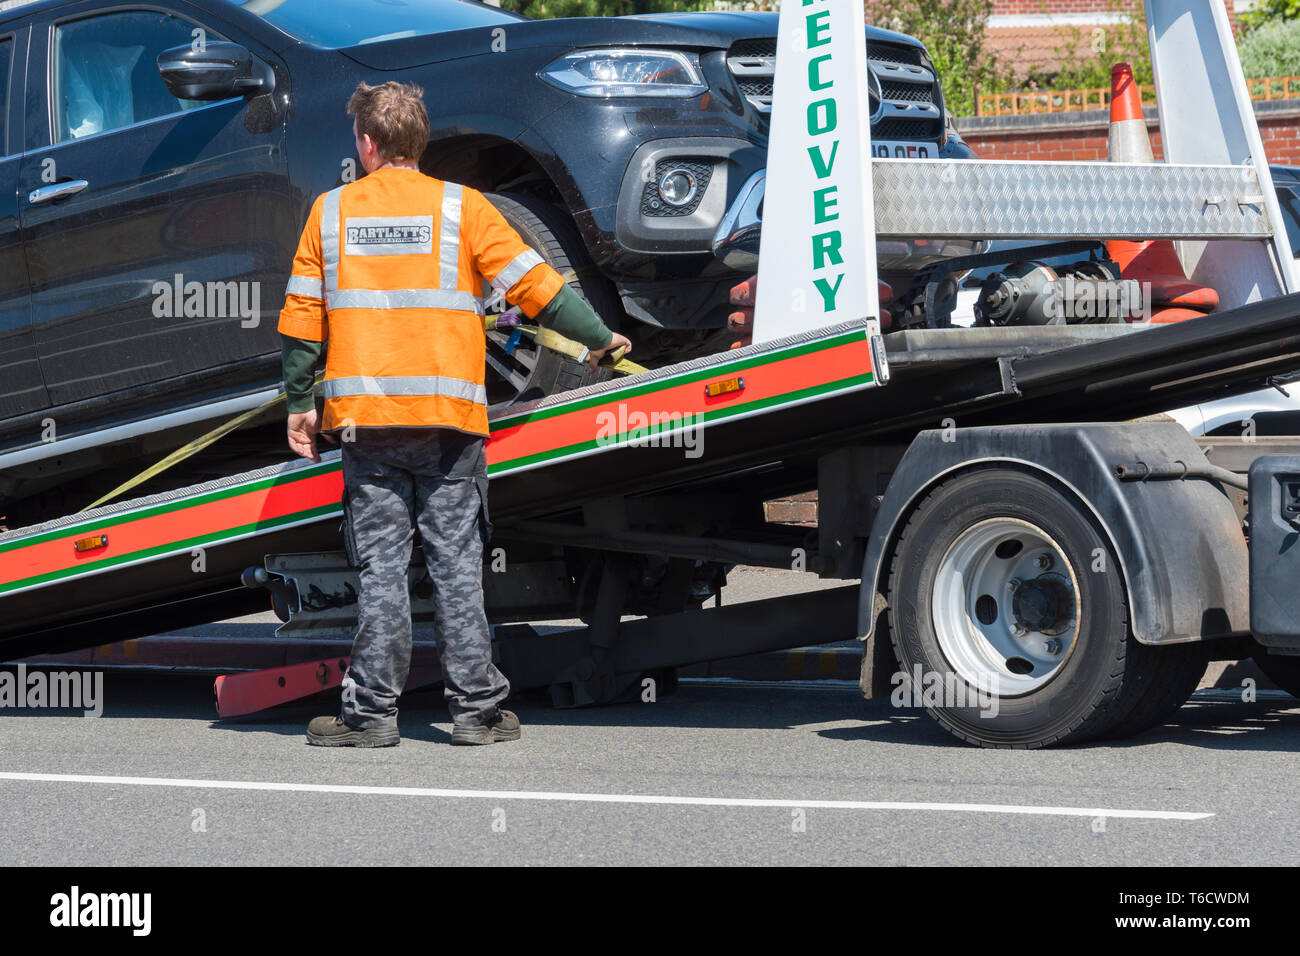 Bartletts breakdown recovery vehicle at the roadside putting a car on a trailer, in the UK. Stock Photo